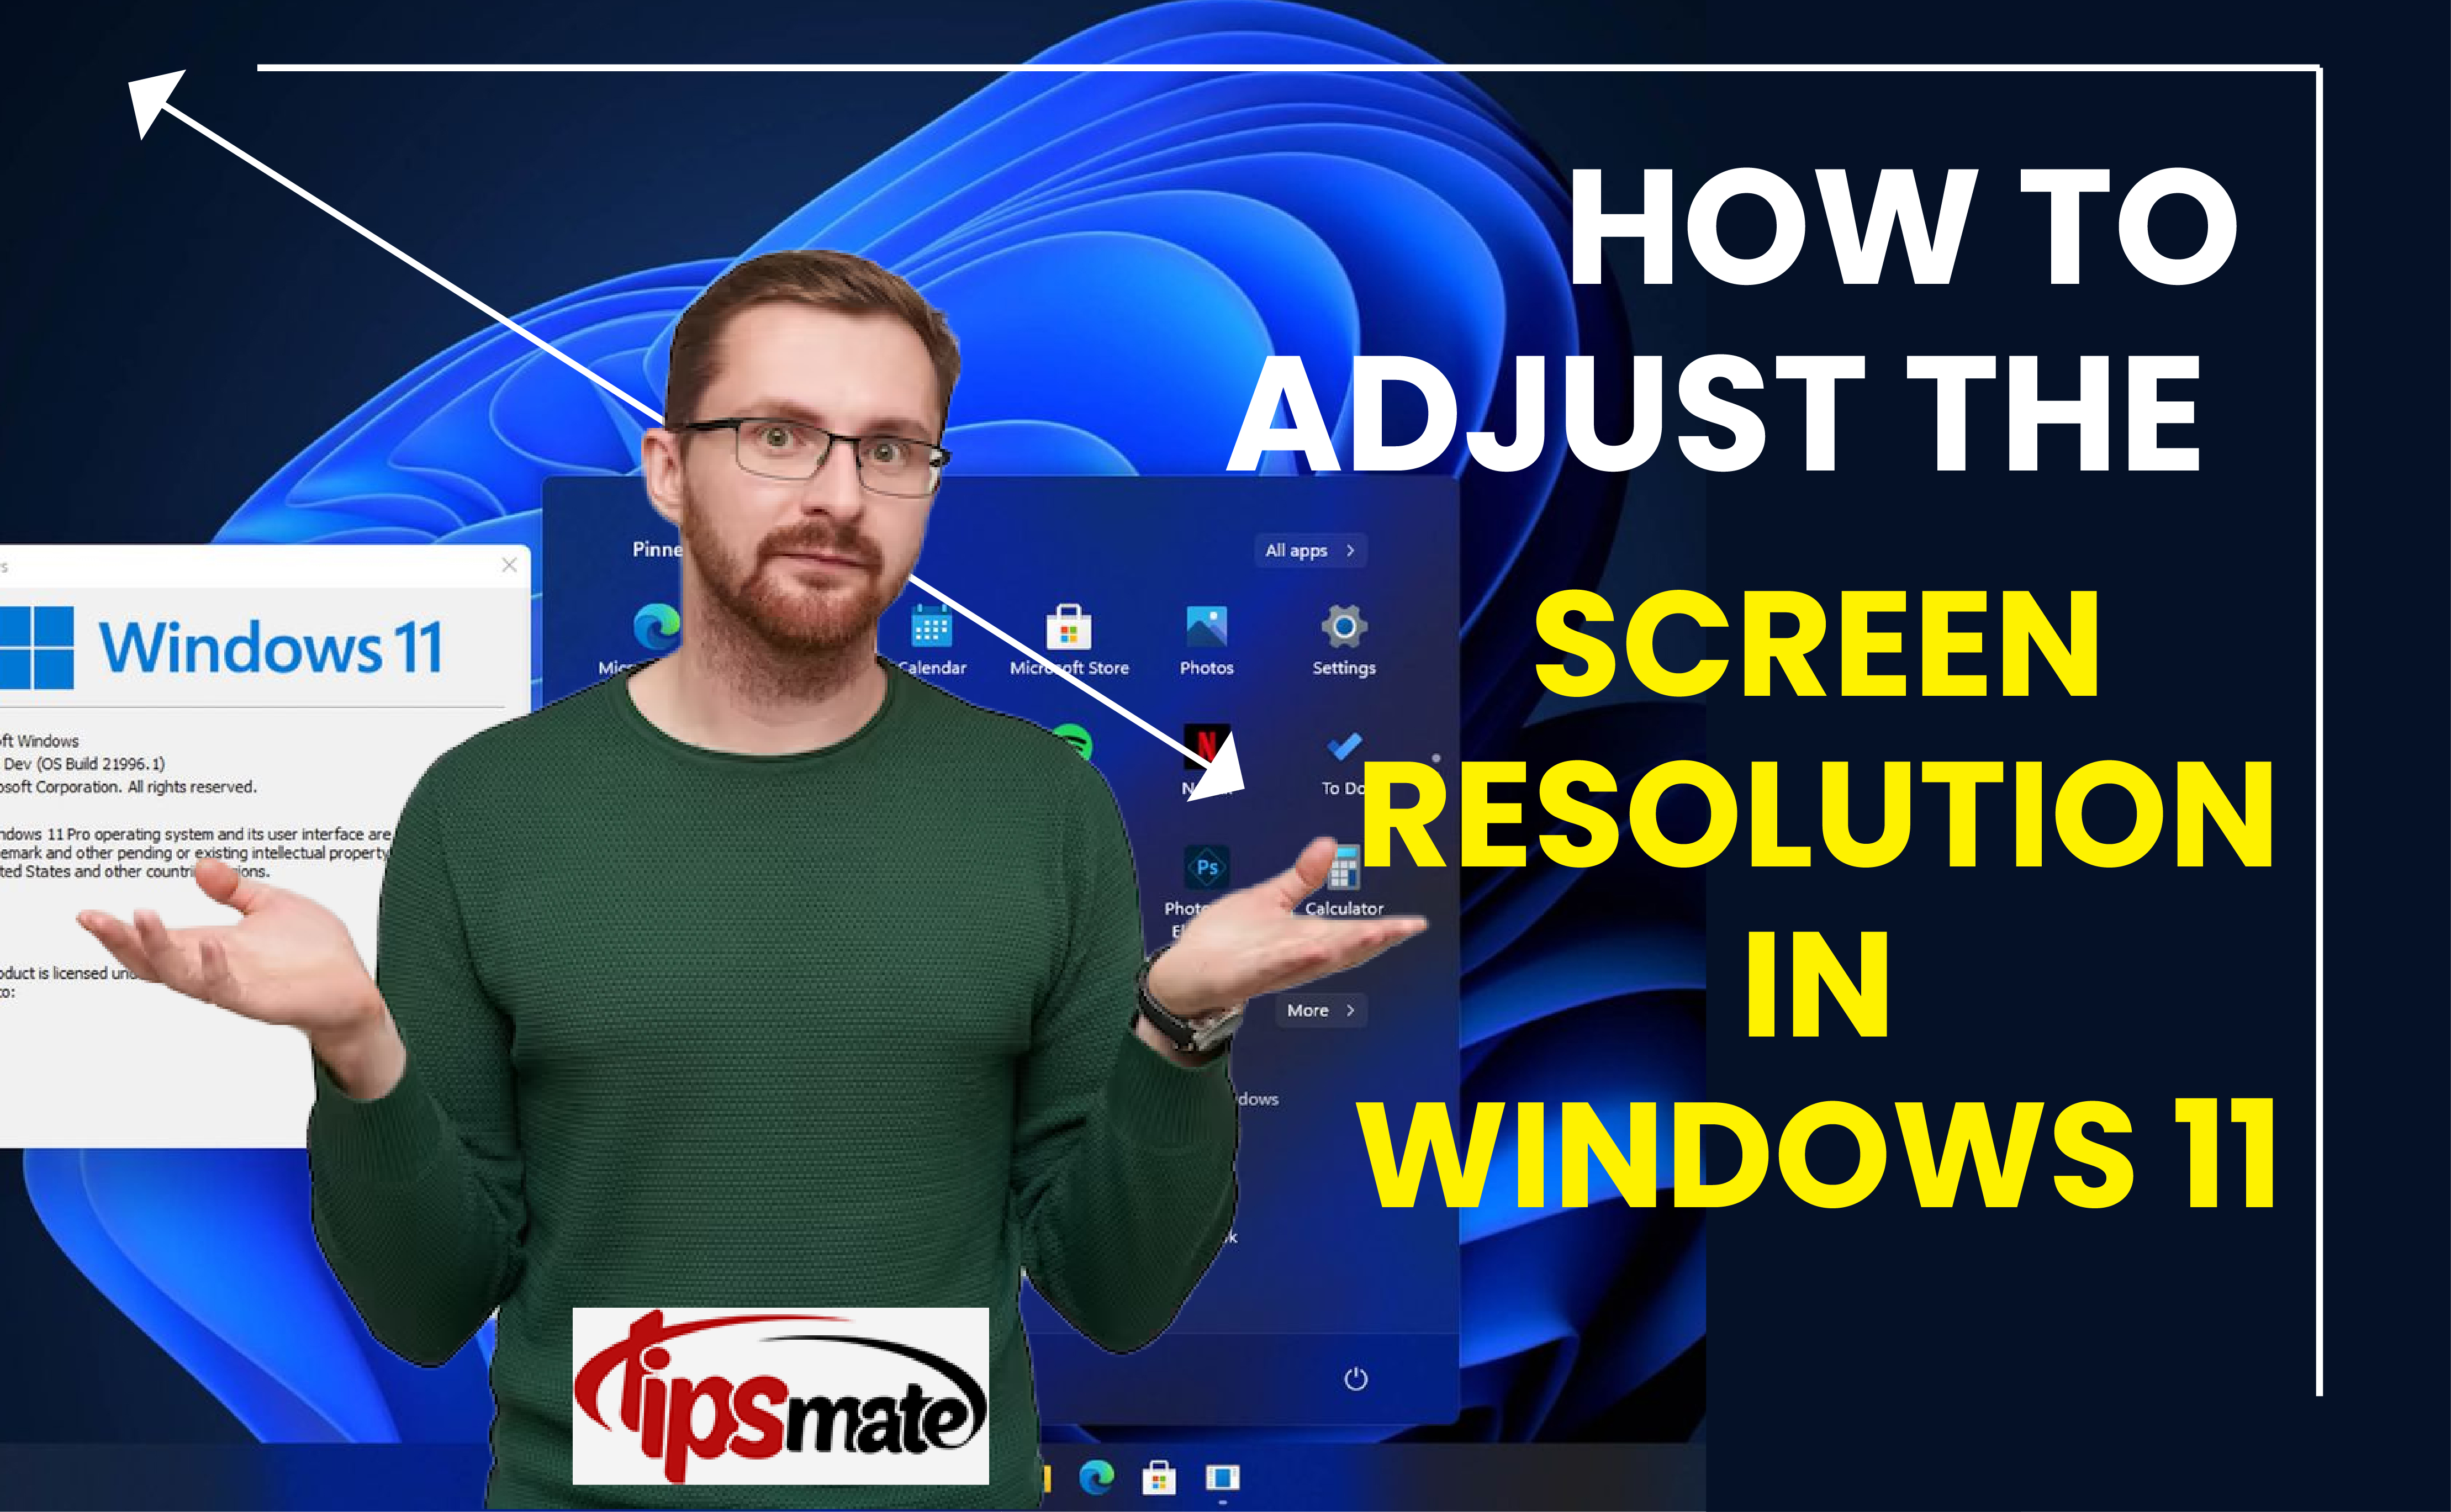 How to Adjust the Screen Resolution in Windows 11